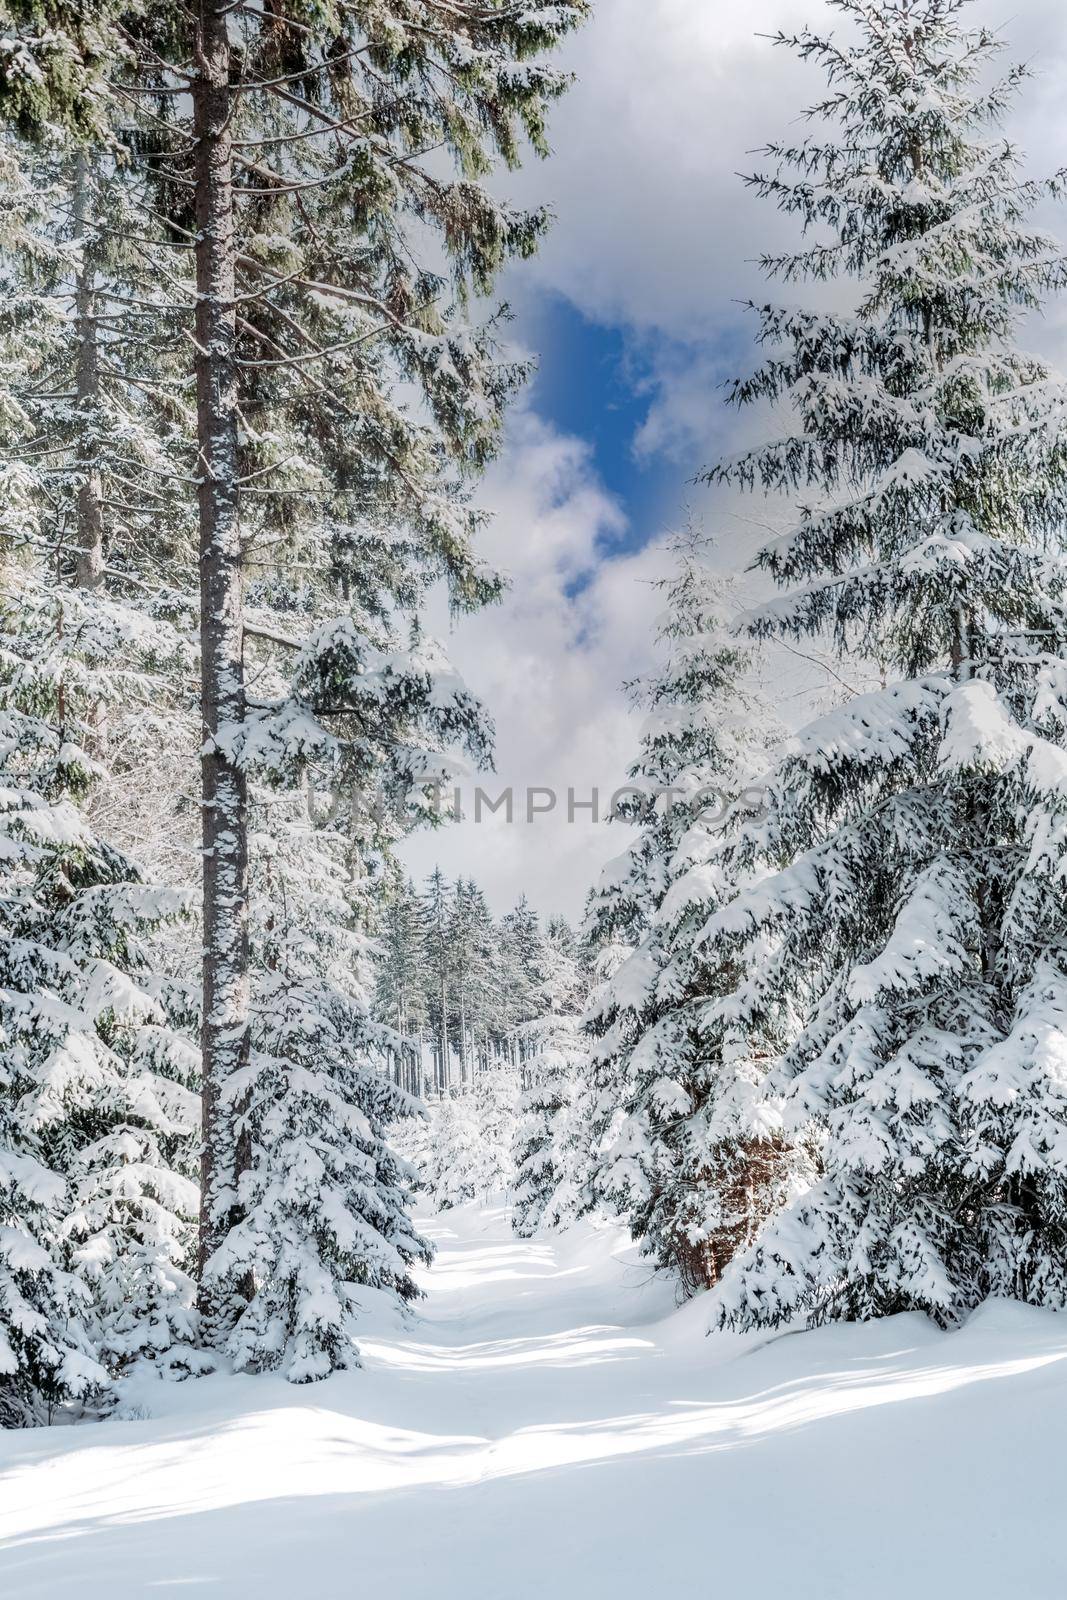 winter snowy forest with conifers in sunny weather.